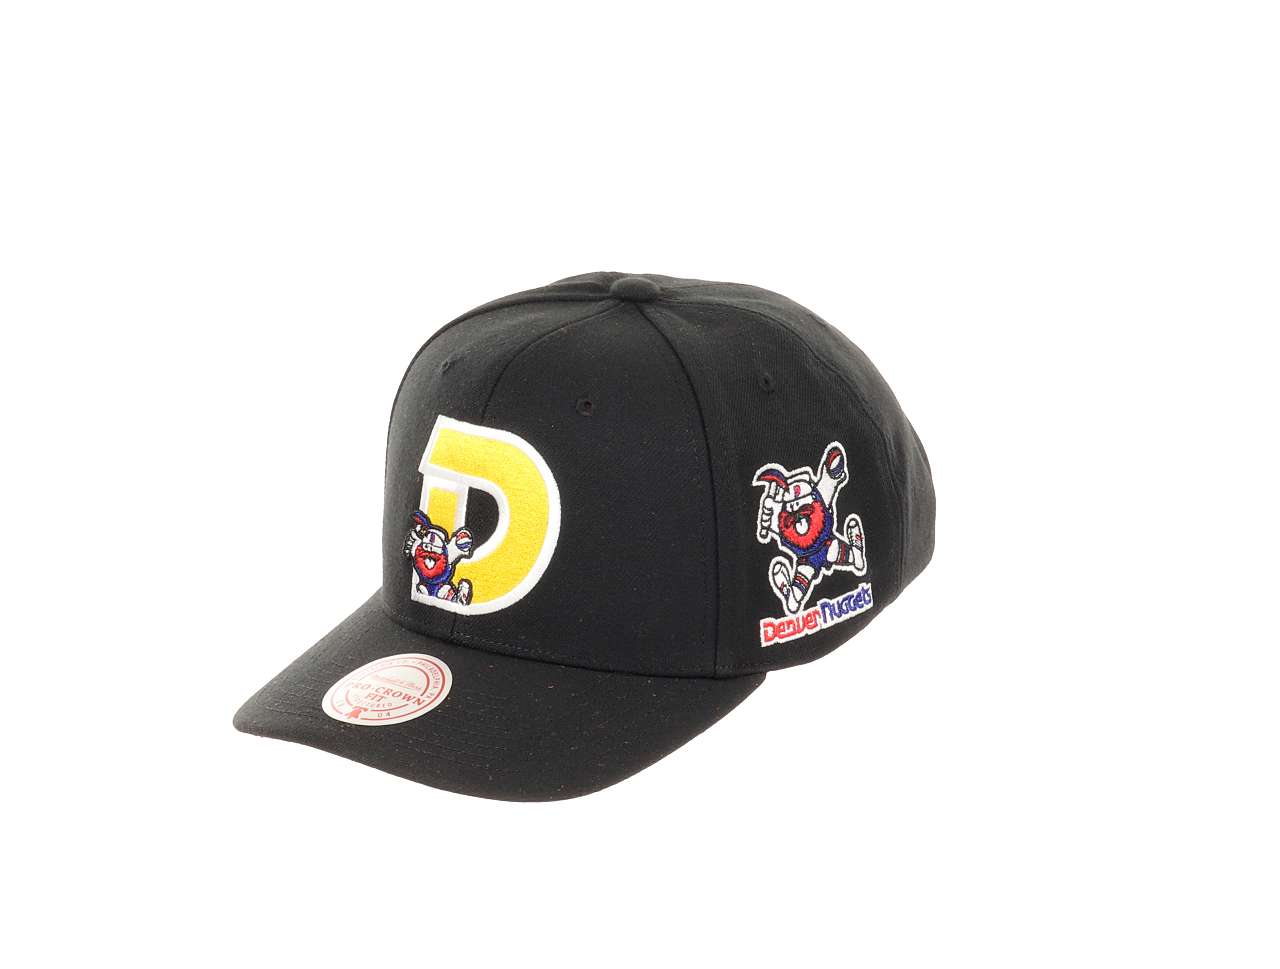 Denver Nuggets NBA Icon Grail Pro Snapback Hardwood Claasic Cap Pro Crown Fit Black Mitchell & Ness